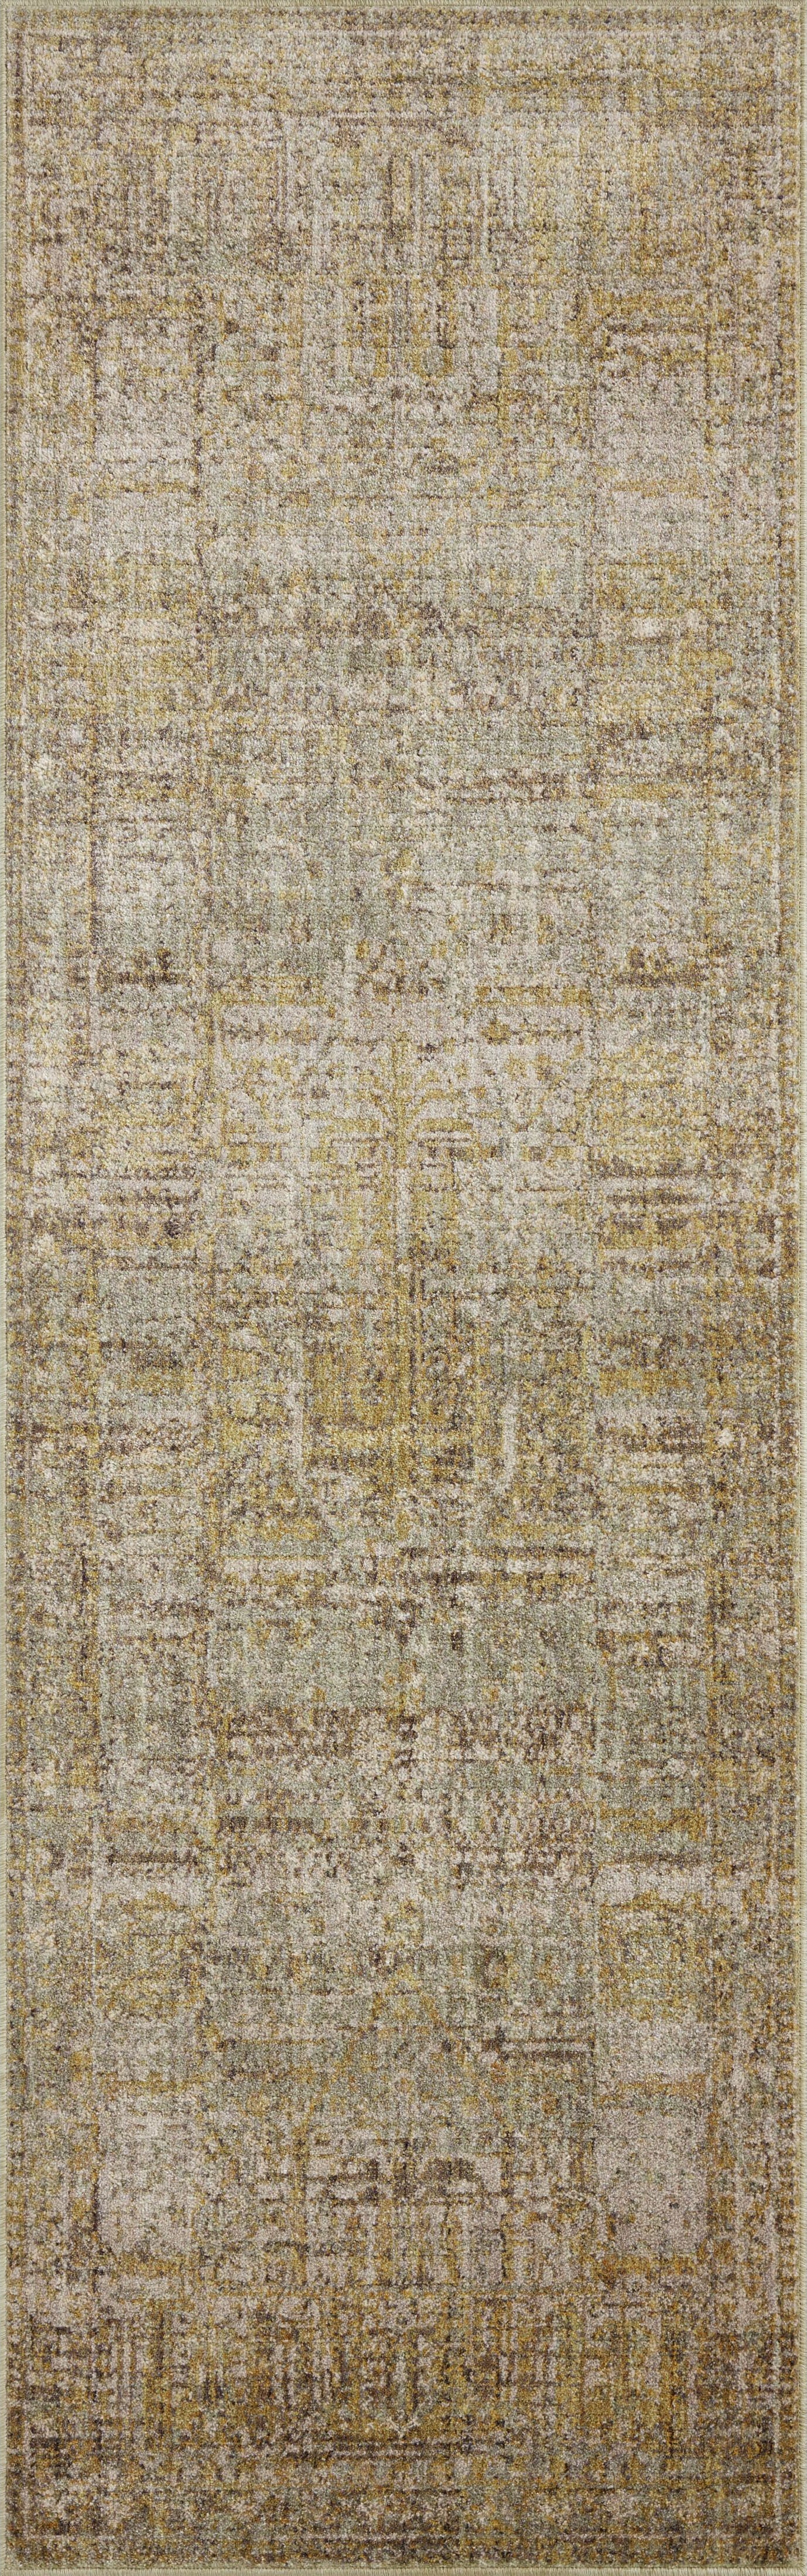 The Bradbury Dove / Gold Rug has small-scale motifs that, combined with the rug’s vibrant and varying colors, create eye-catching dimension in the room. Bradbury echoes the look of traditional rugs but comes alive in fresh, modern palettes that balance energetic bright tones with softer, distressed ones. Amethyst Home provides interior design, new construction, custom furniture, and area rugs in the Park City metro area.